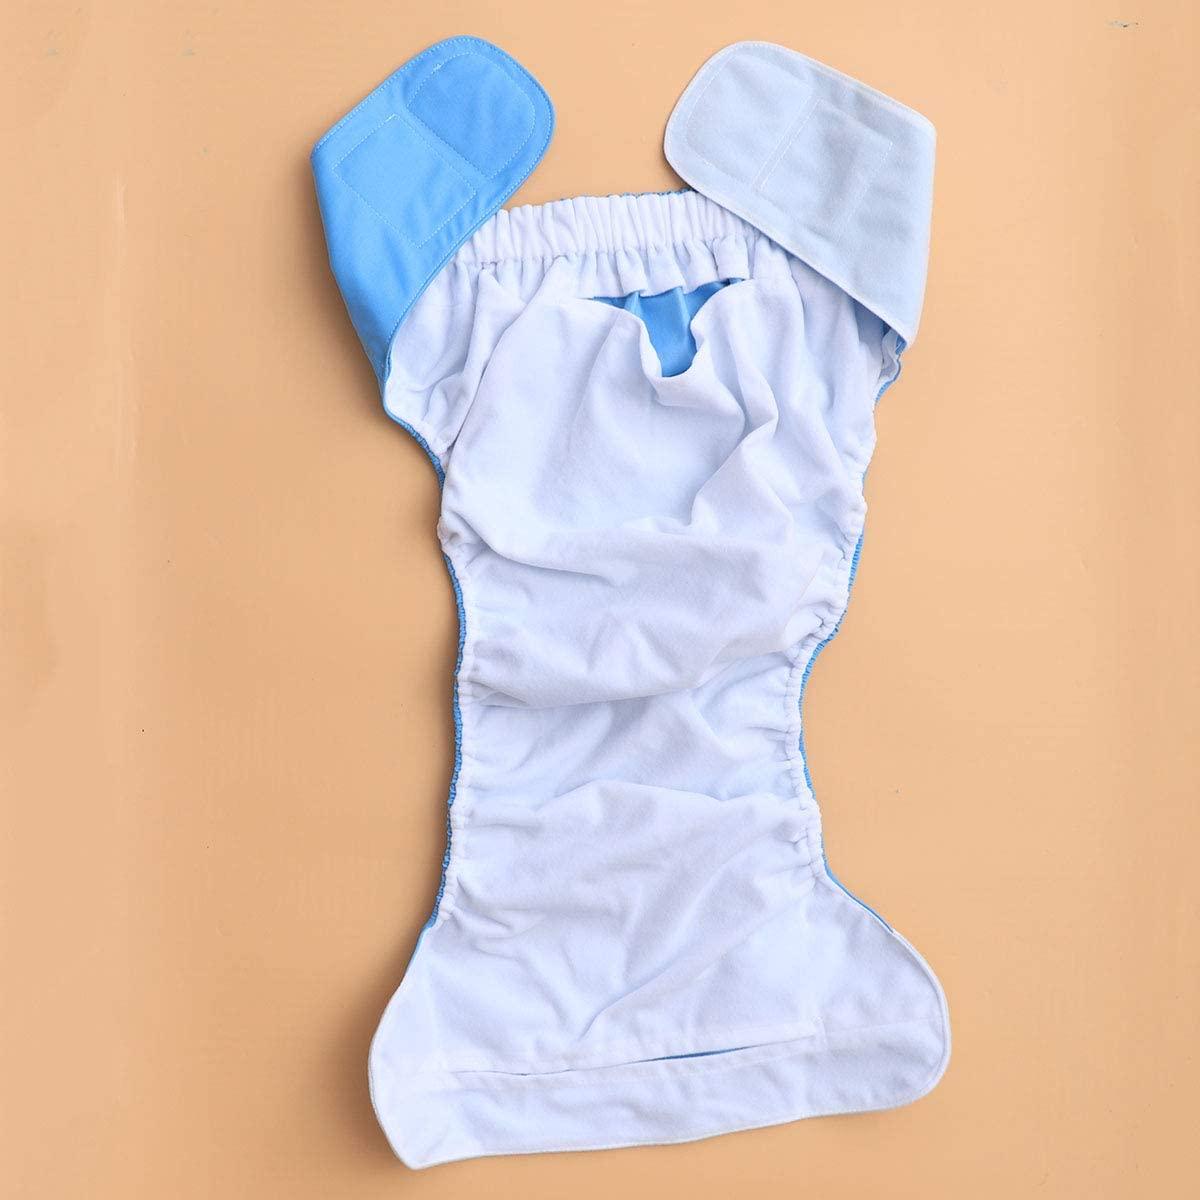 Healifty Washable underwear2pcs Adult Diapers Covers Reusable